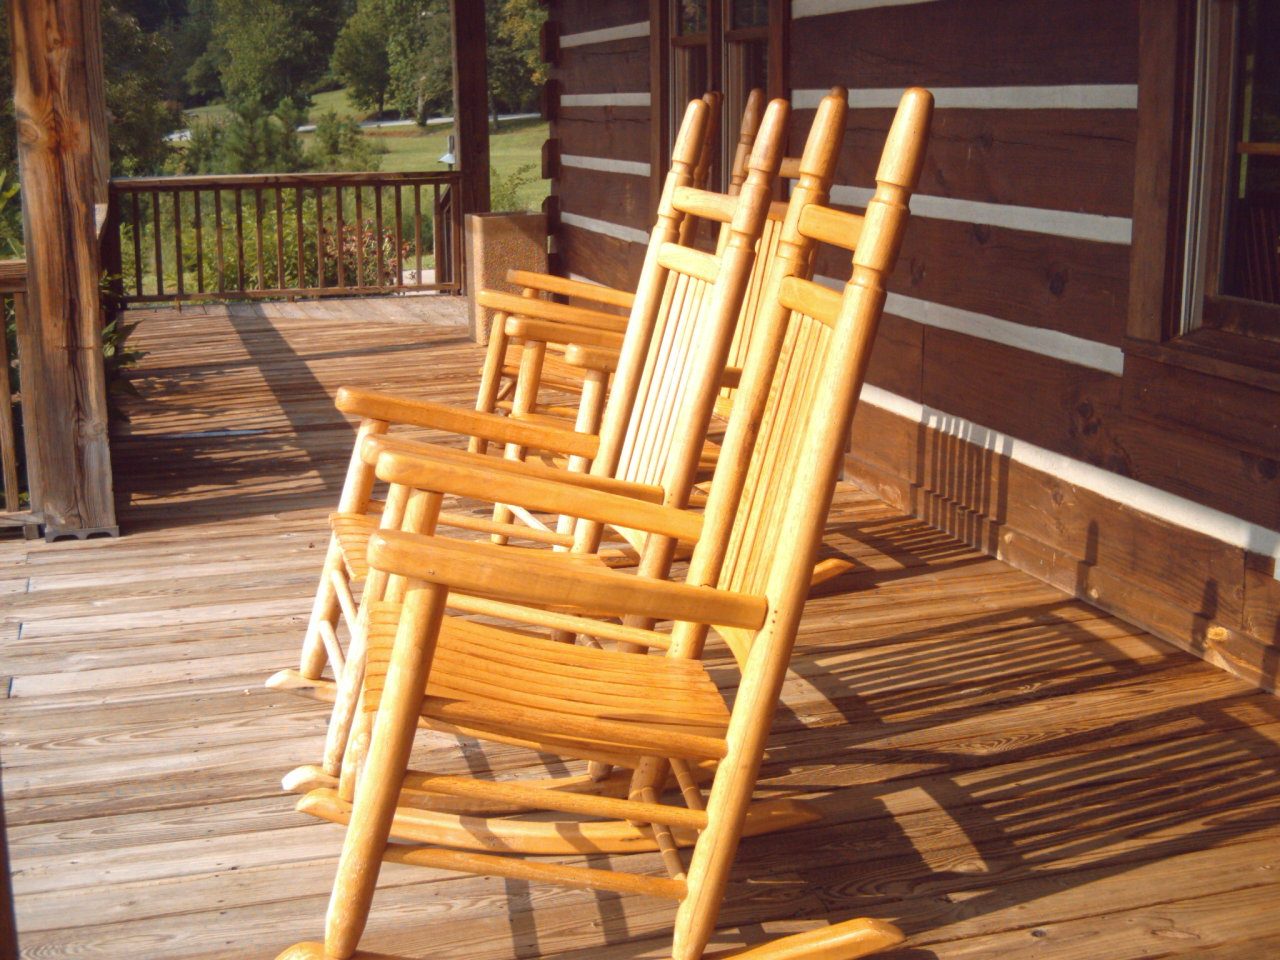 rocking chairs, poarch, wooden